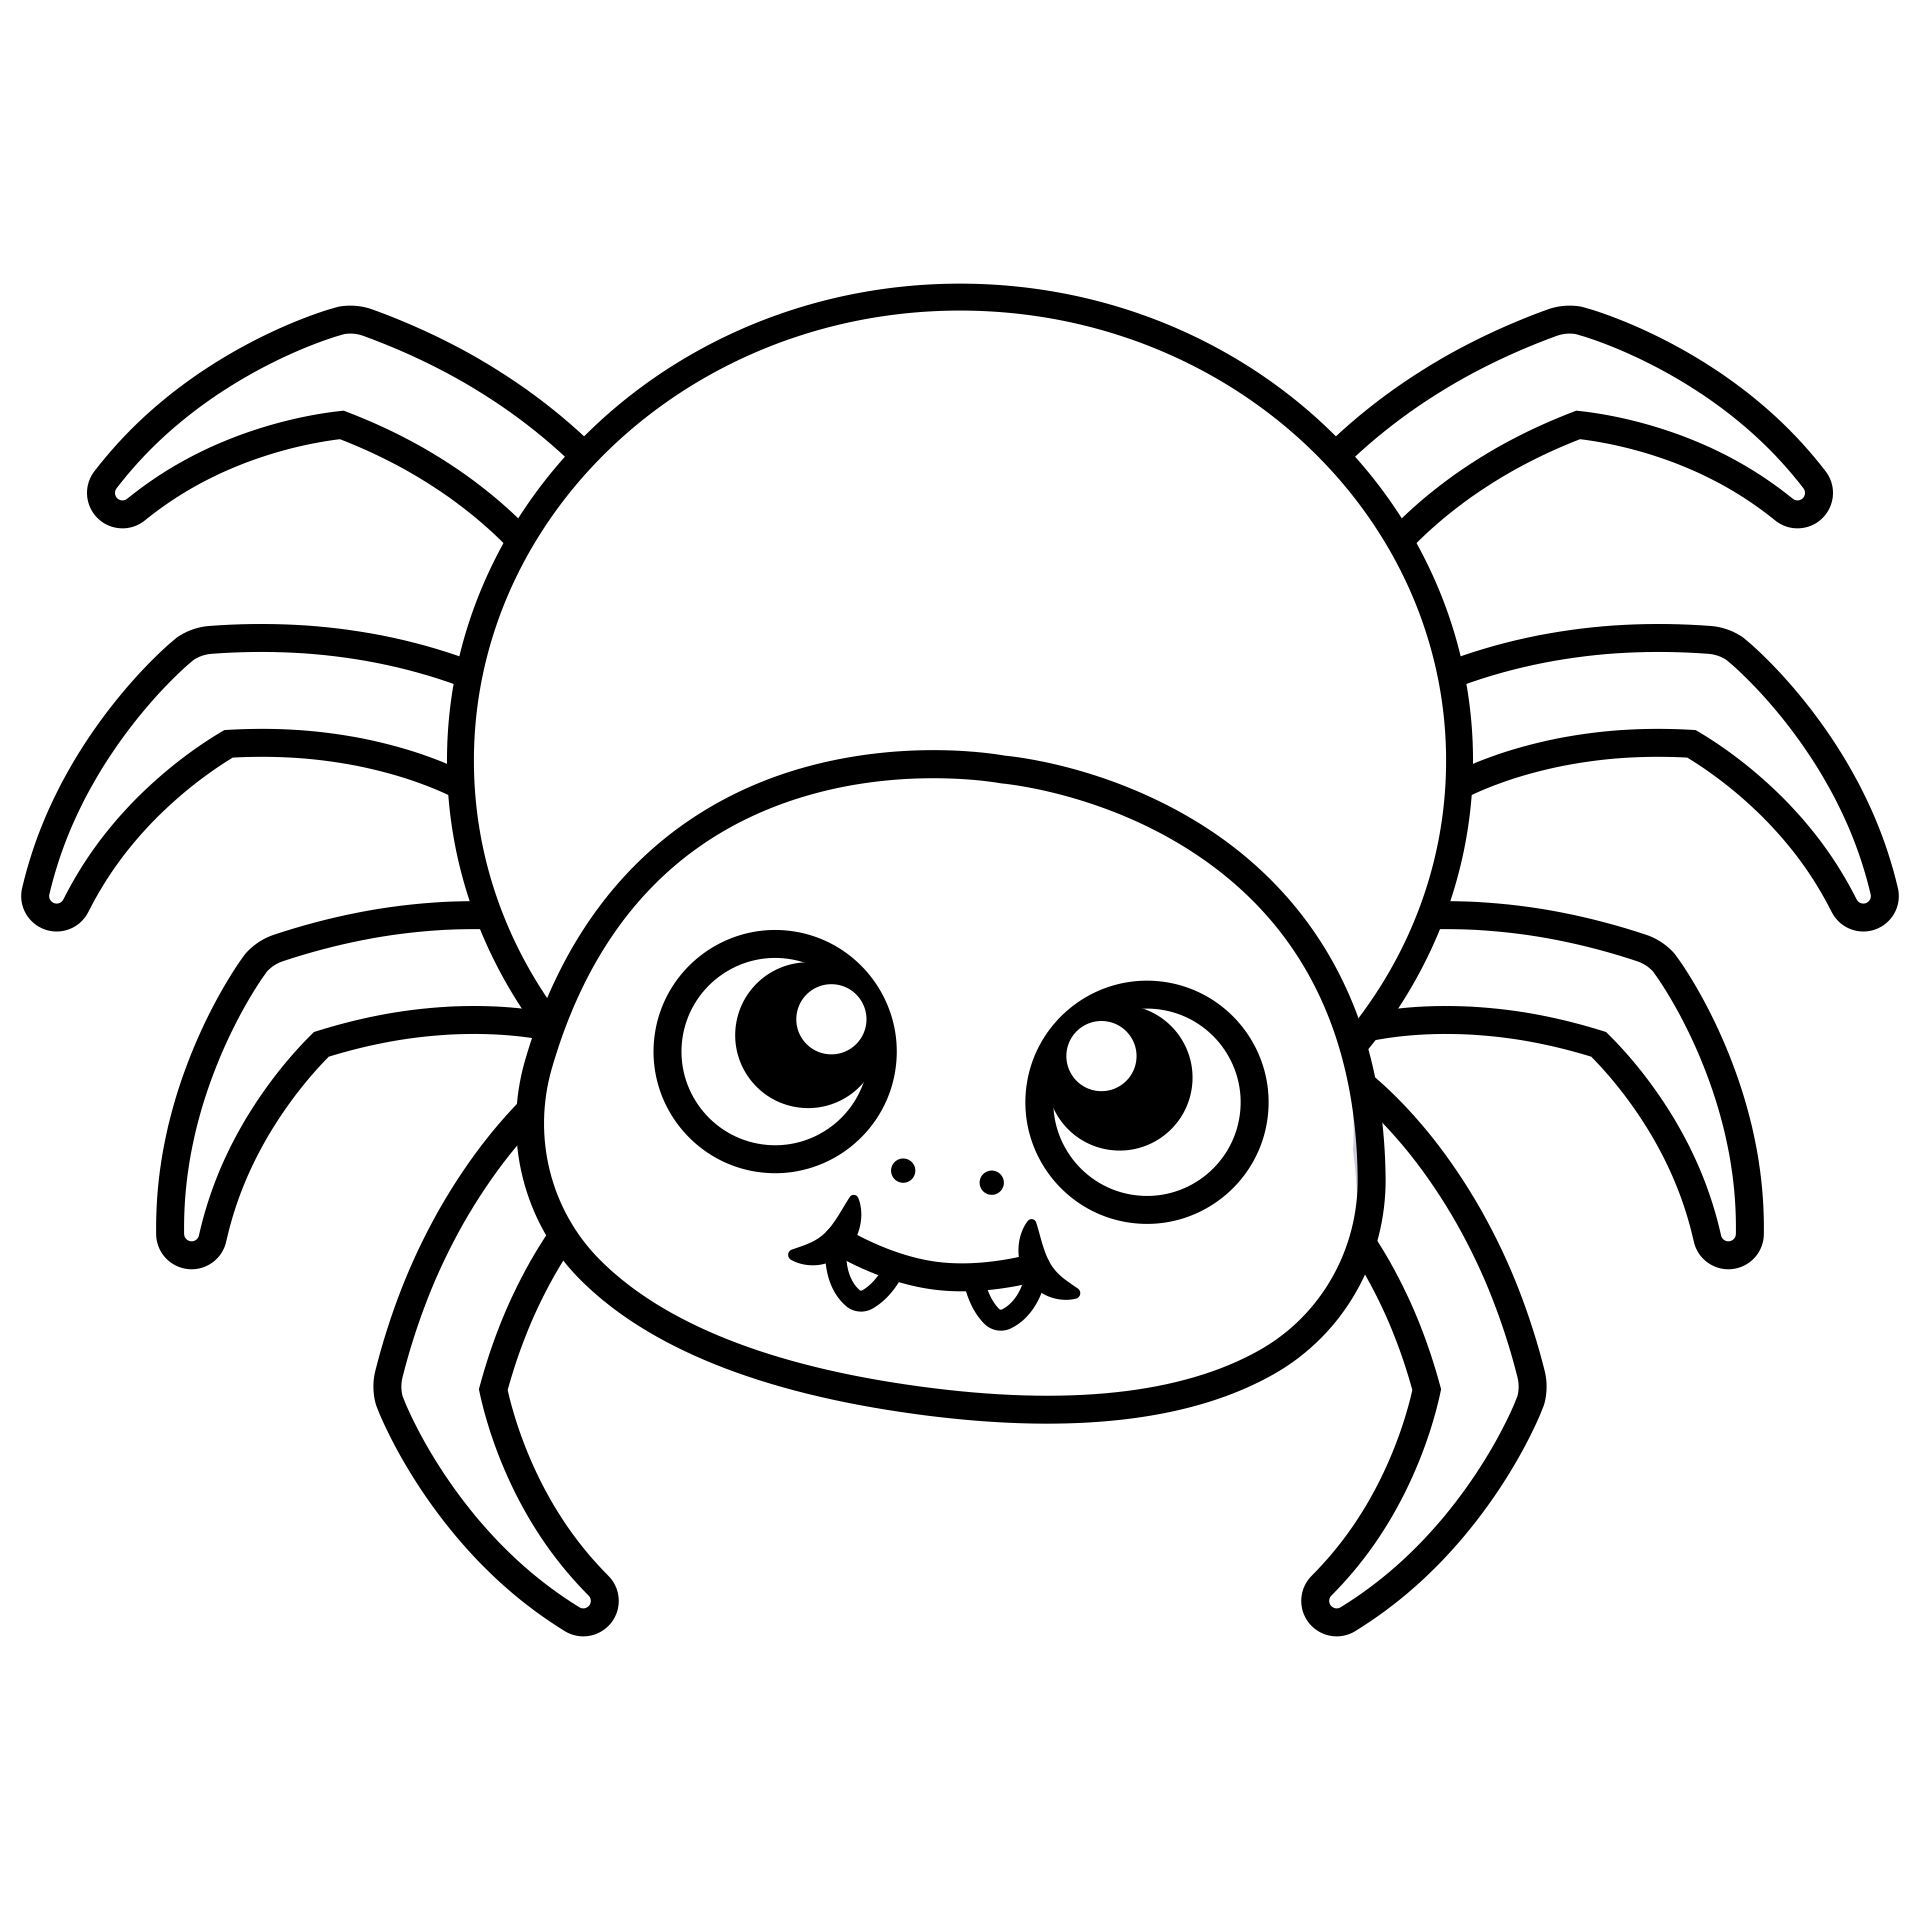 Printable spider coloring pages spider coloring page halloween coloring halloween coloring sheets